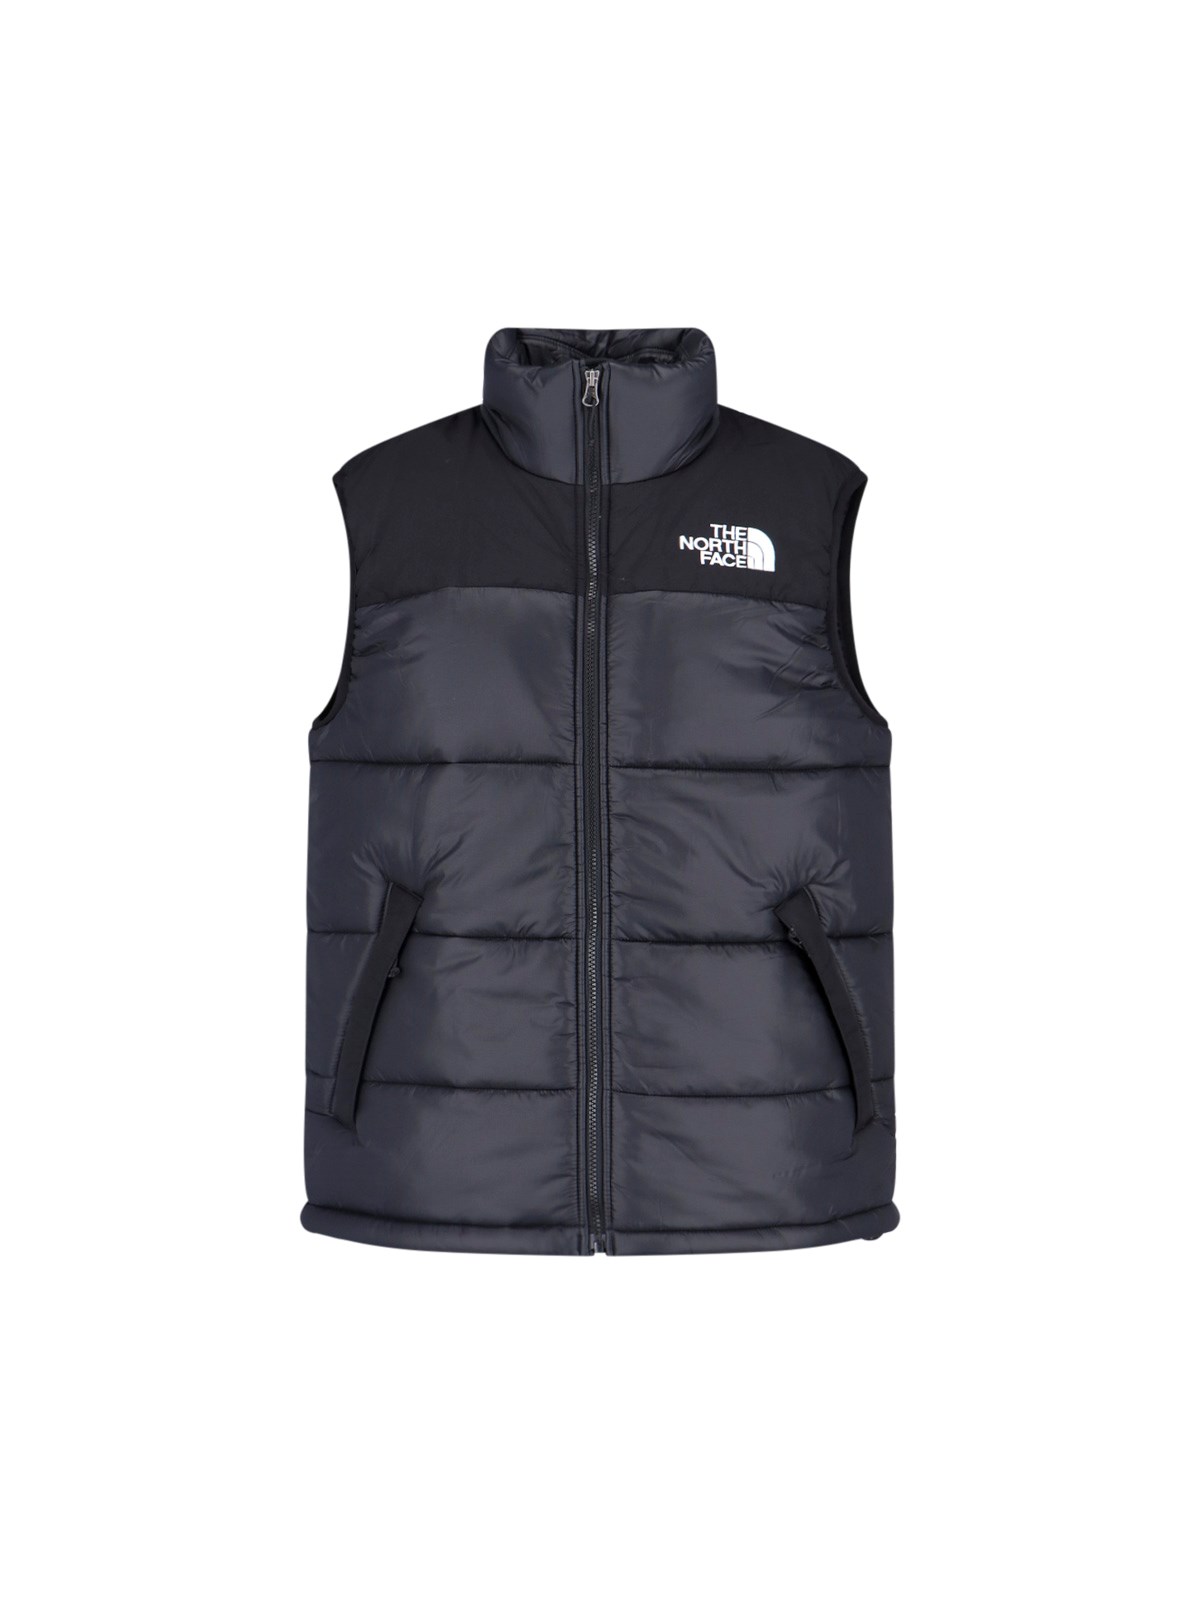 THE NORTH FACE 'HIMALAYAN' PADDED VEST